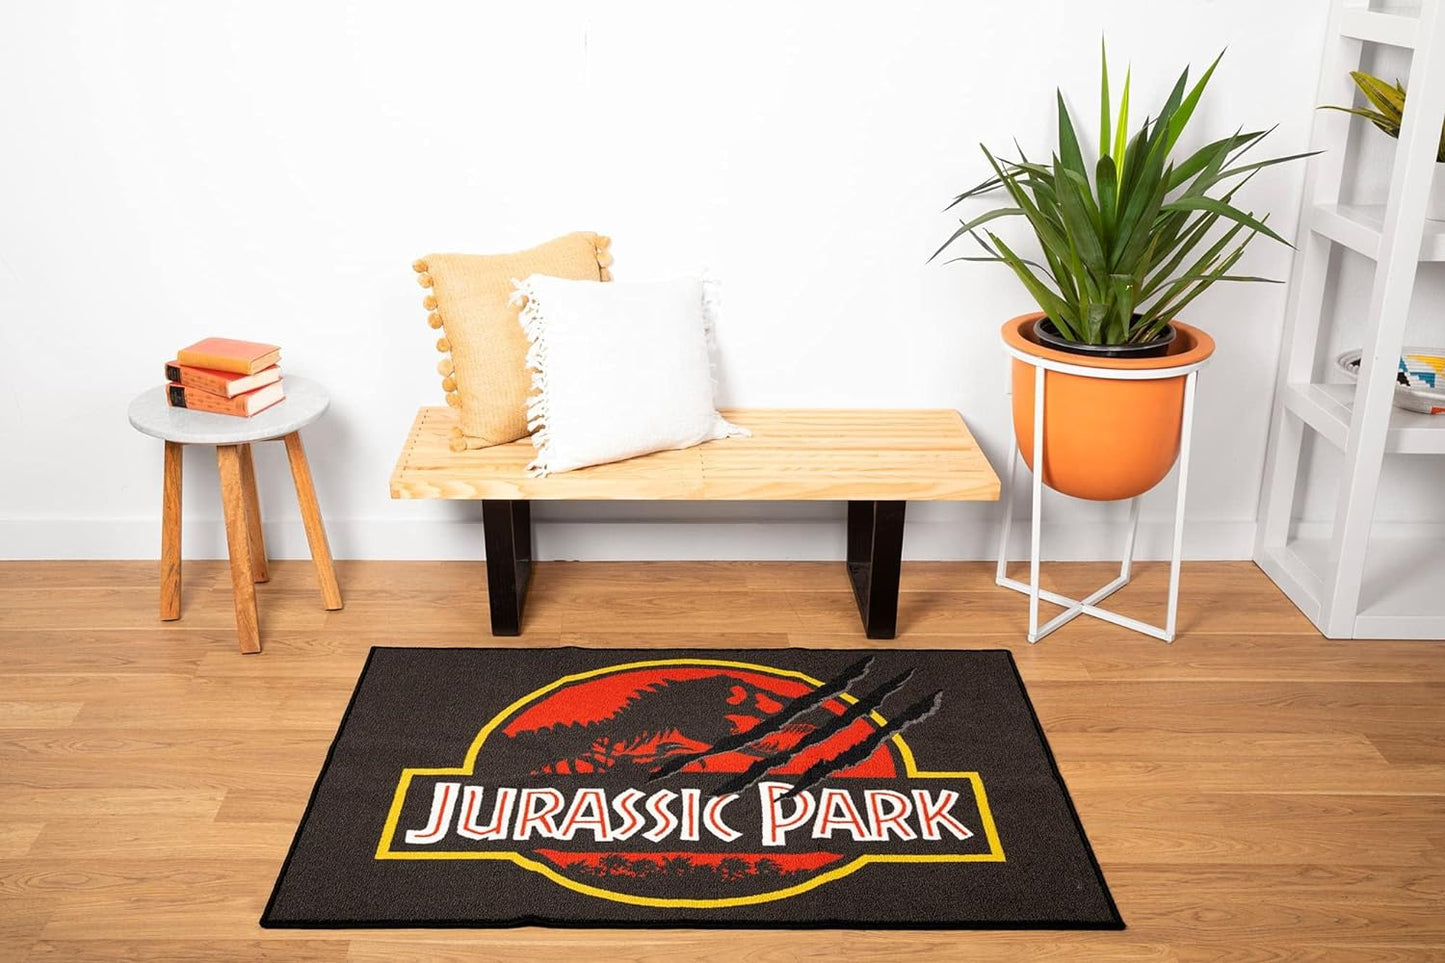 JURASSIC PARK LOGO PRINTED AREA RUG 52 X 36 INCHES